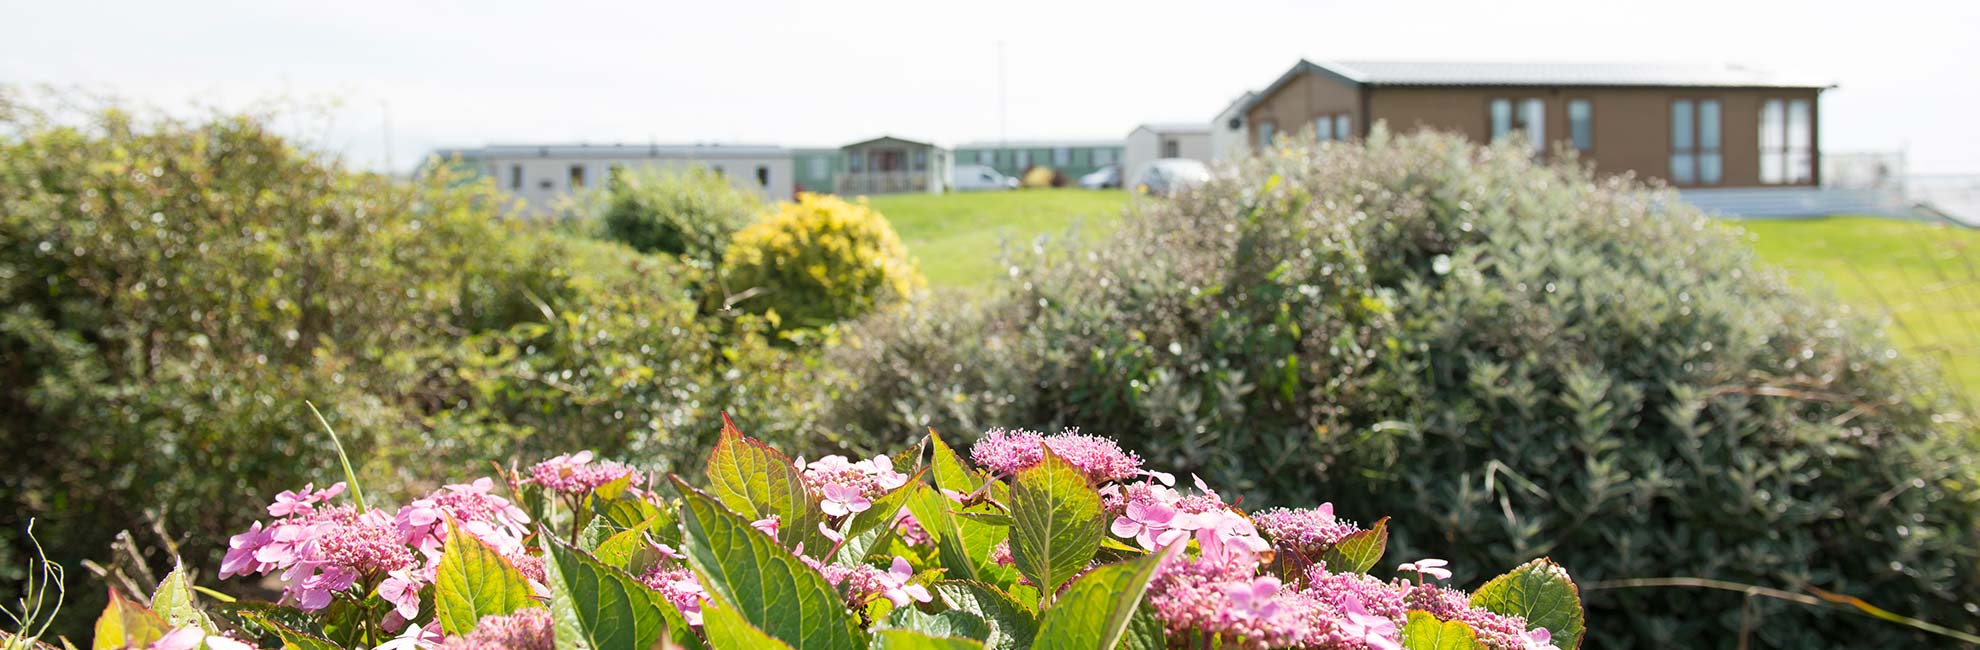 Ocean Edge Holiday Park with flowers and bushes in the foreground